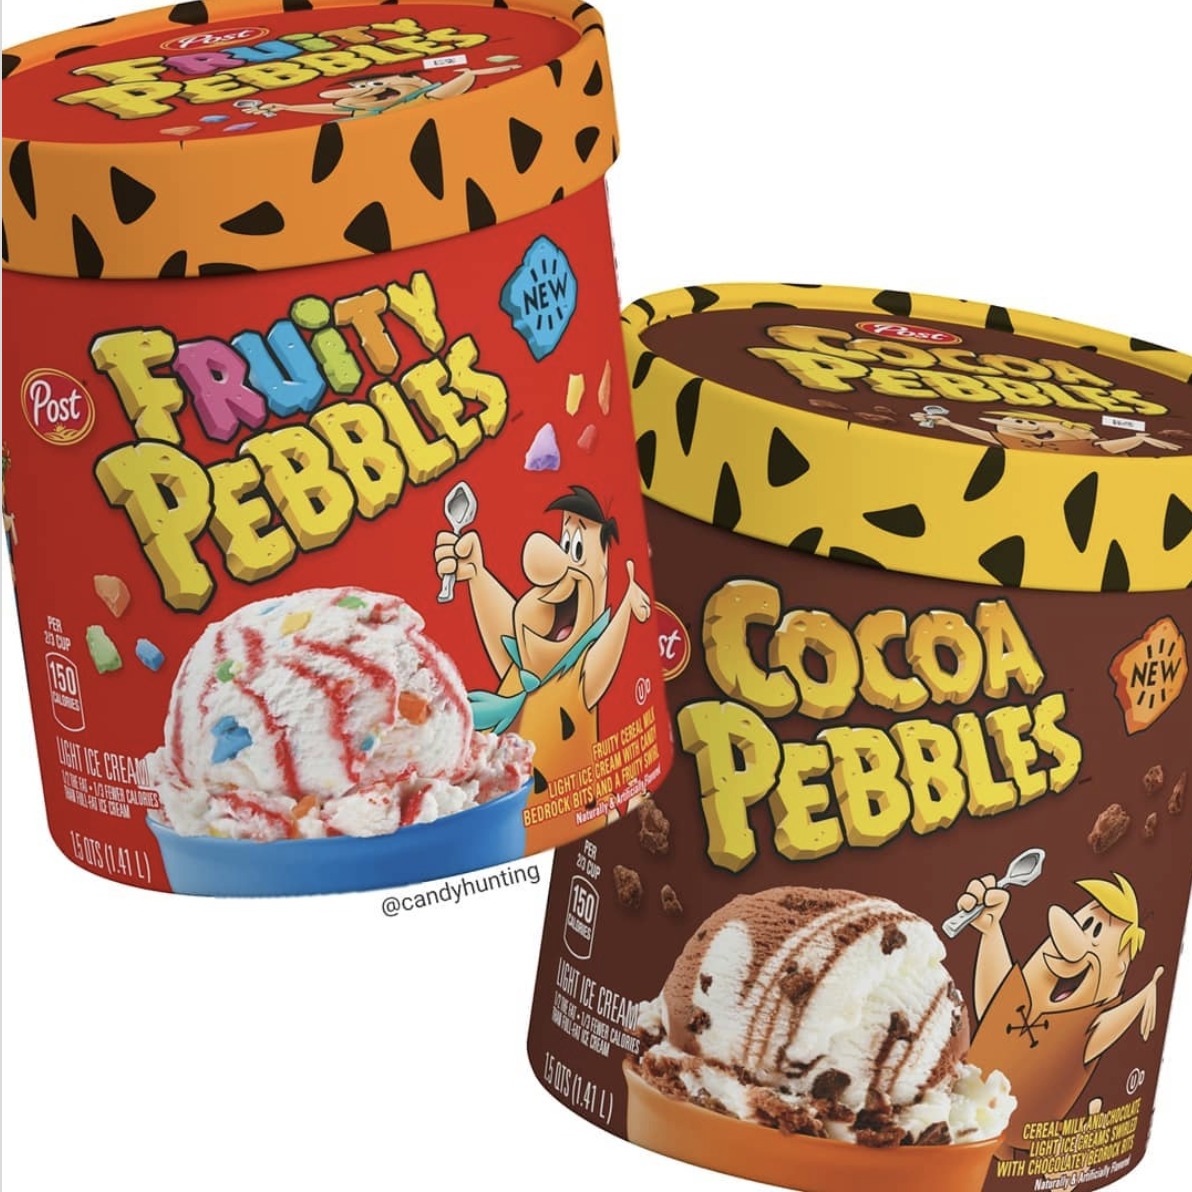 Fruity Pebbles and Cocoa Pebbles Ice Cream Exists Now